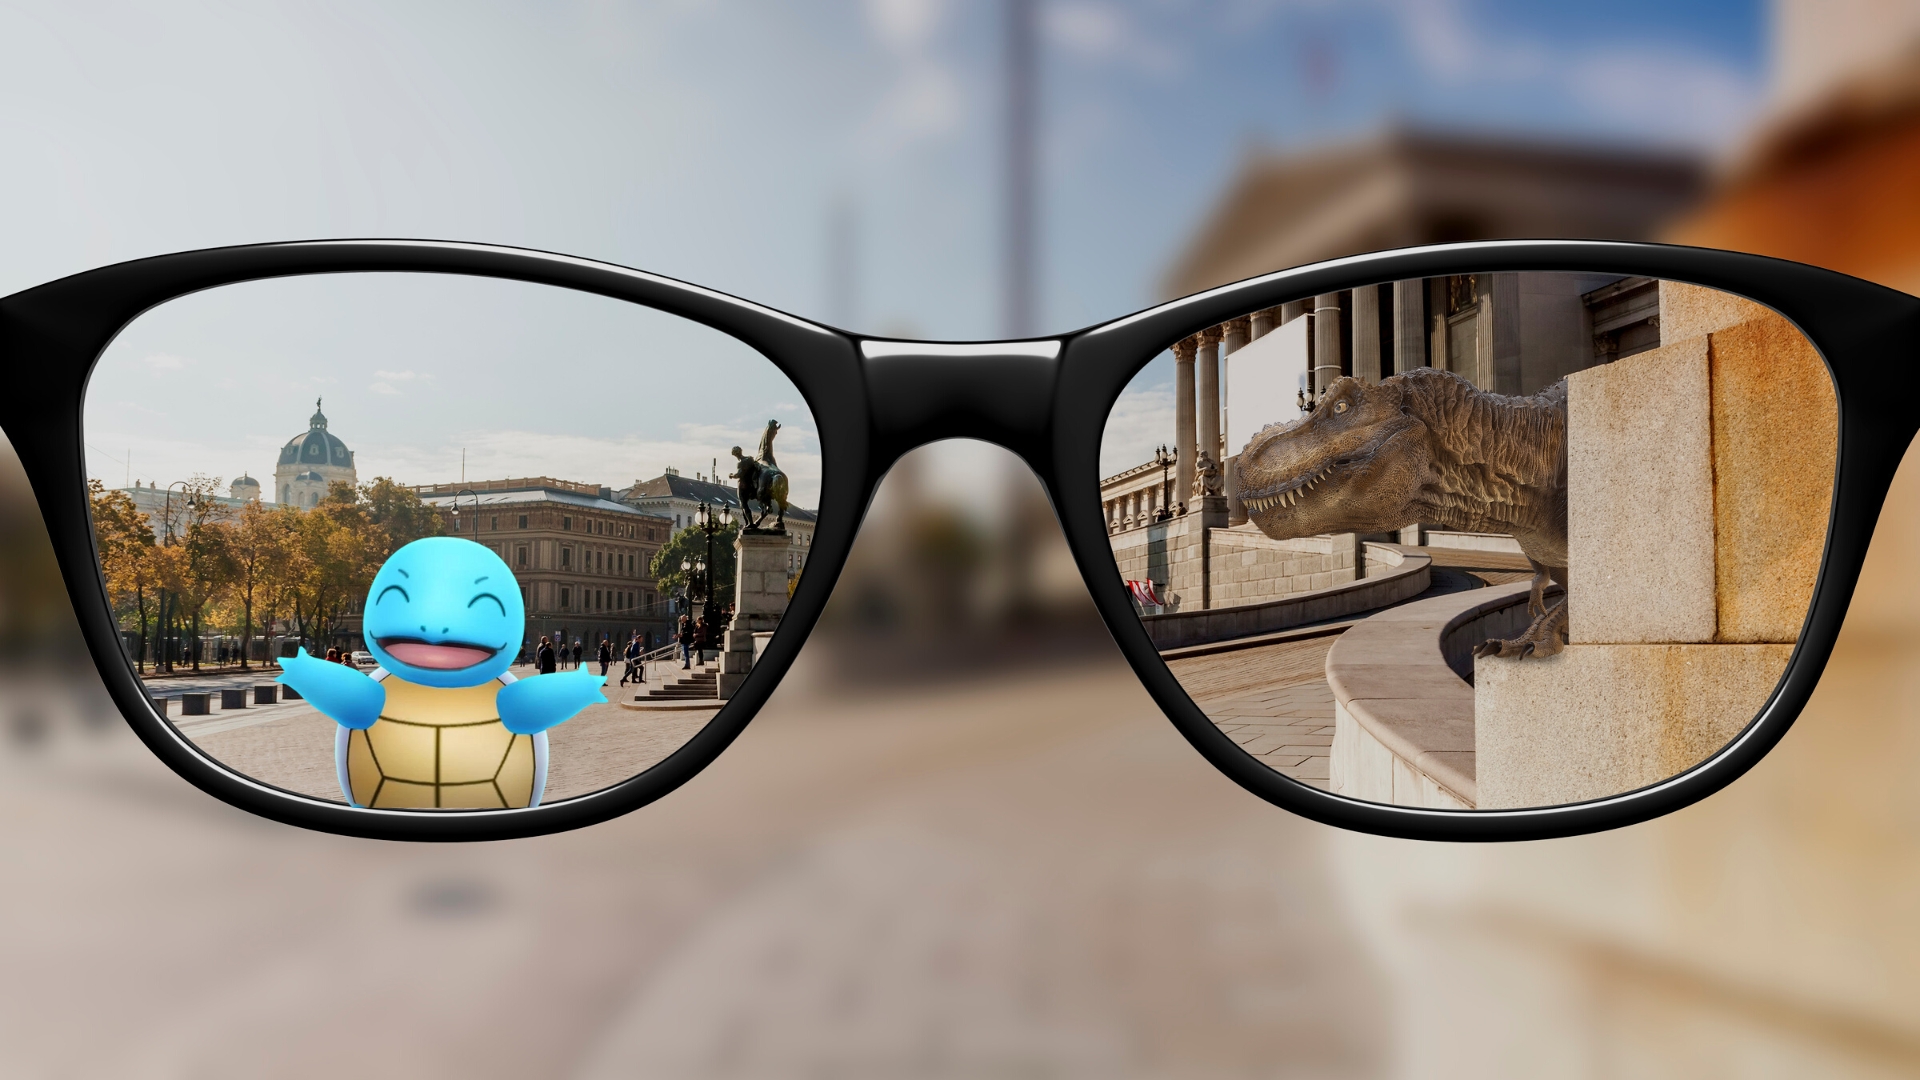 Mixed reality depictions of Pokemon Go's Squirtle and a Tyrannosaurus Rex